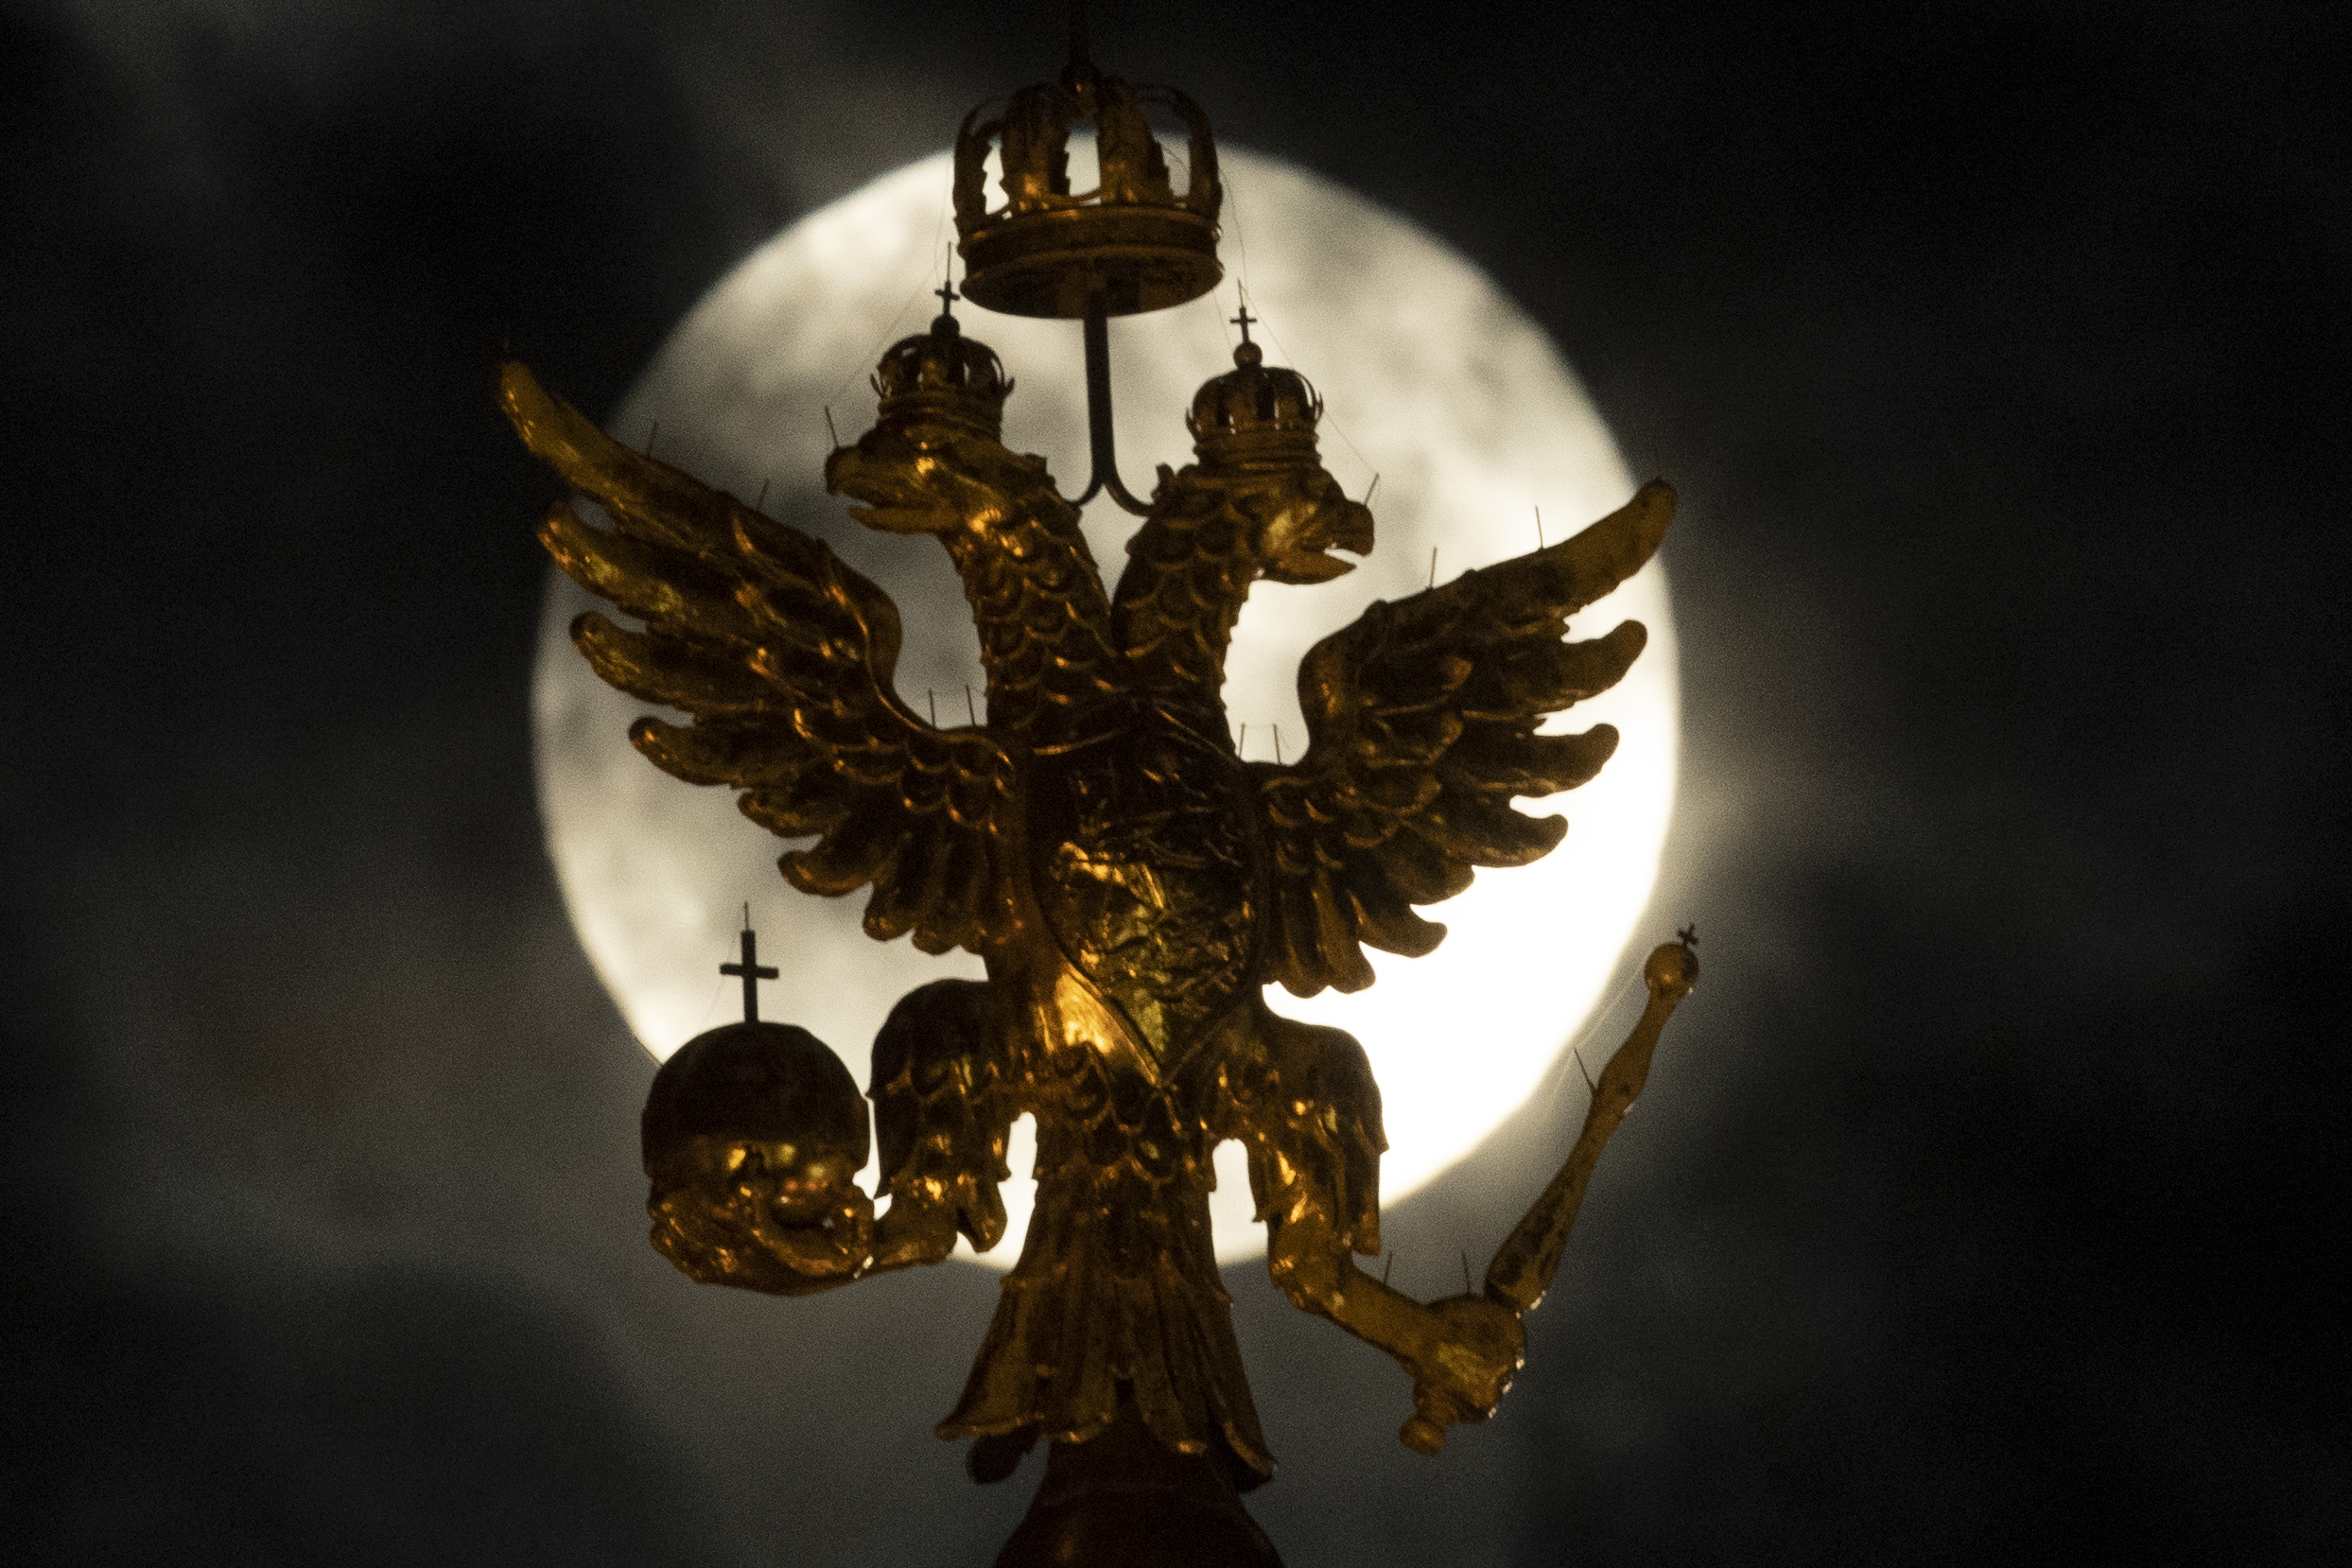 Feb. 19, 2019. Russia's state symbol, the double-headed eagle, is pictured against the full moon, in Moscow, Russia. (Maksim Blinov—Sputnik via AP)